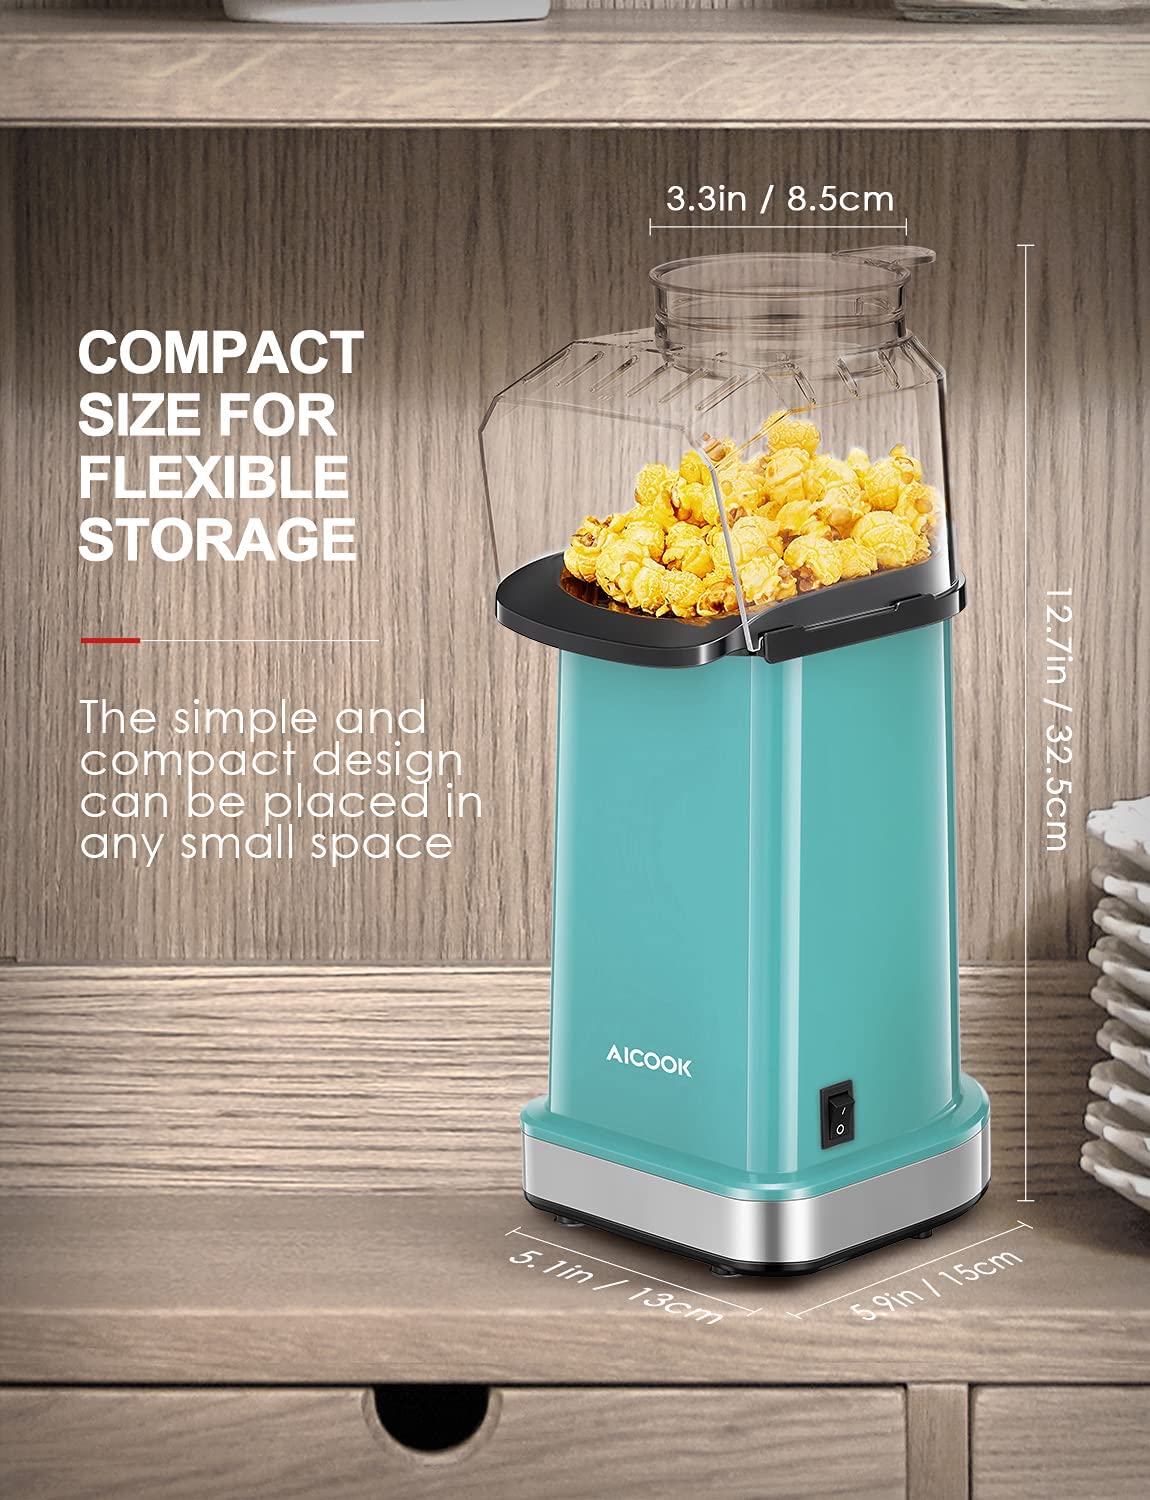 MF Studio Hot Air Popcorn Popper, No Oil Popcorn Maker with Measuring Cup and Removable Lid